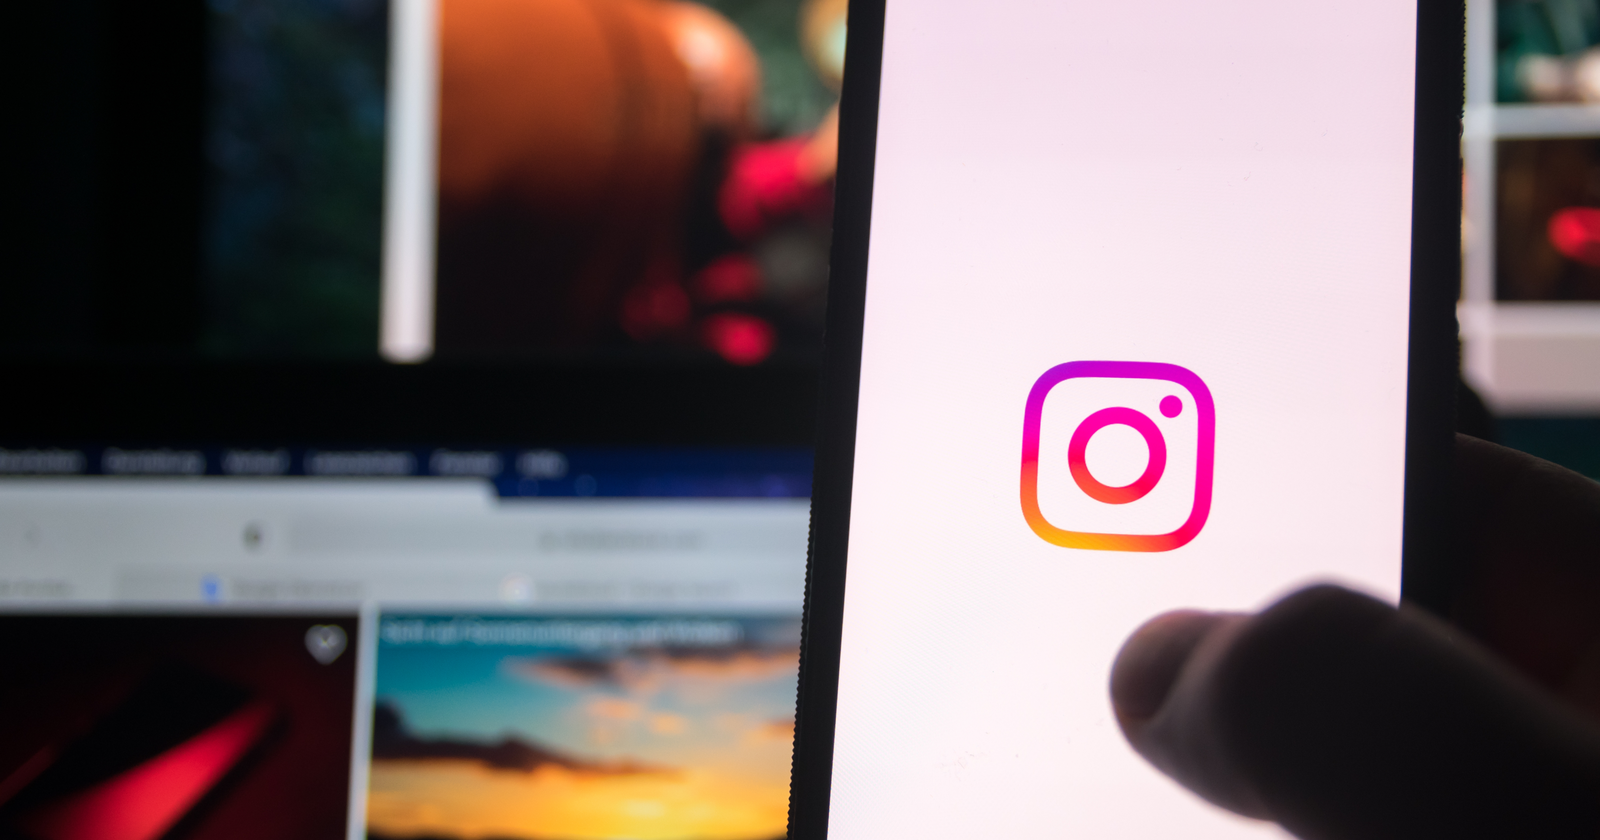 Instagram To Show More Content From People You Don't Follow